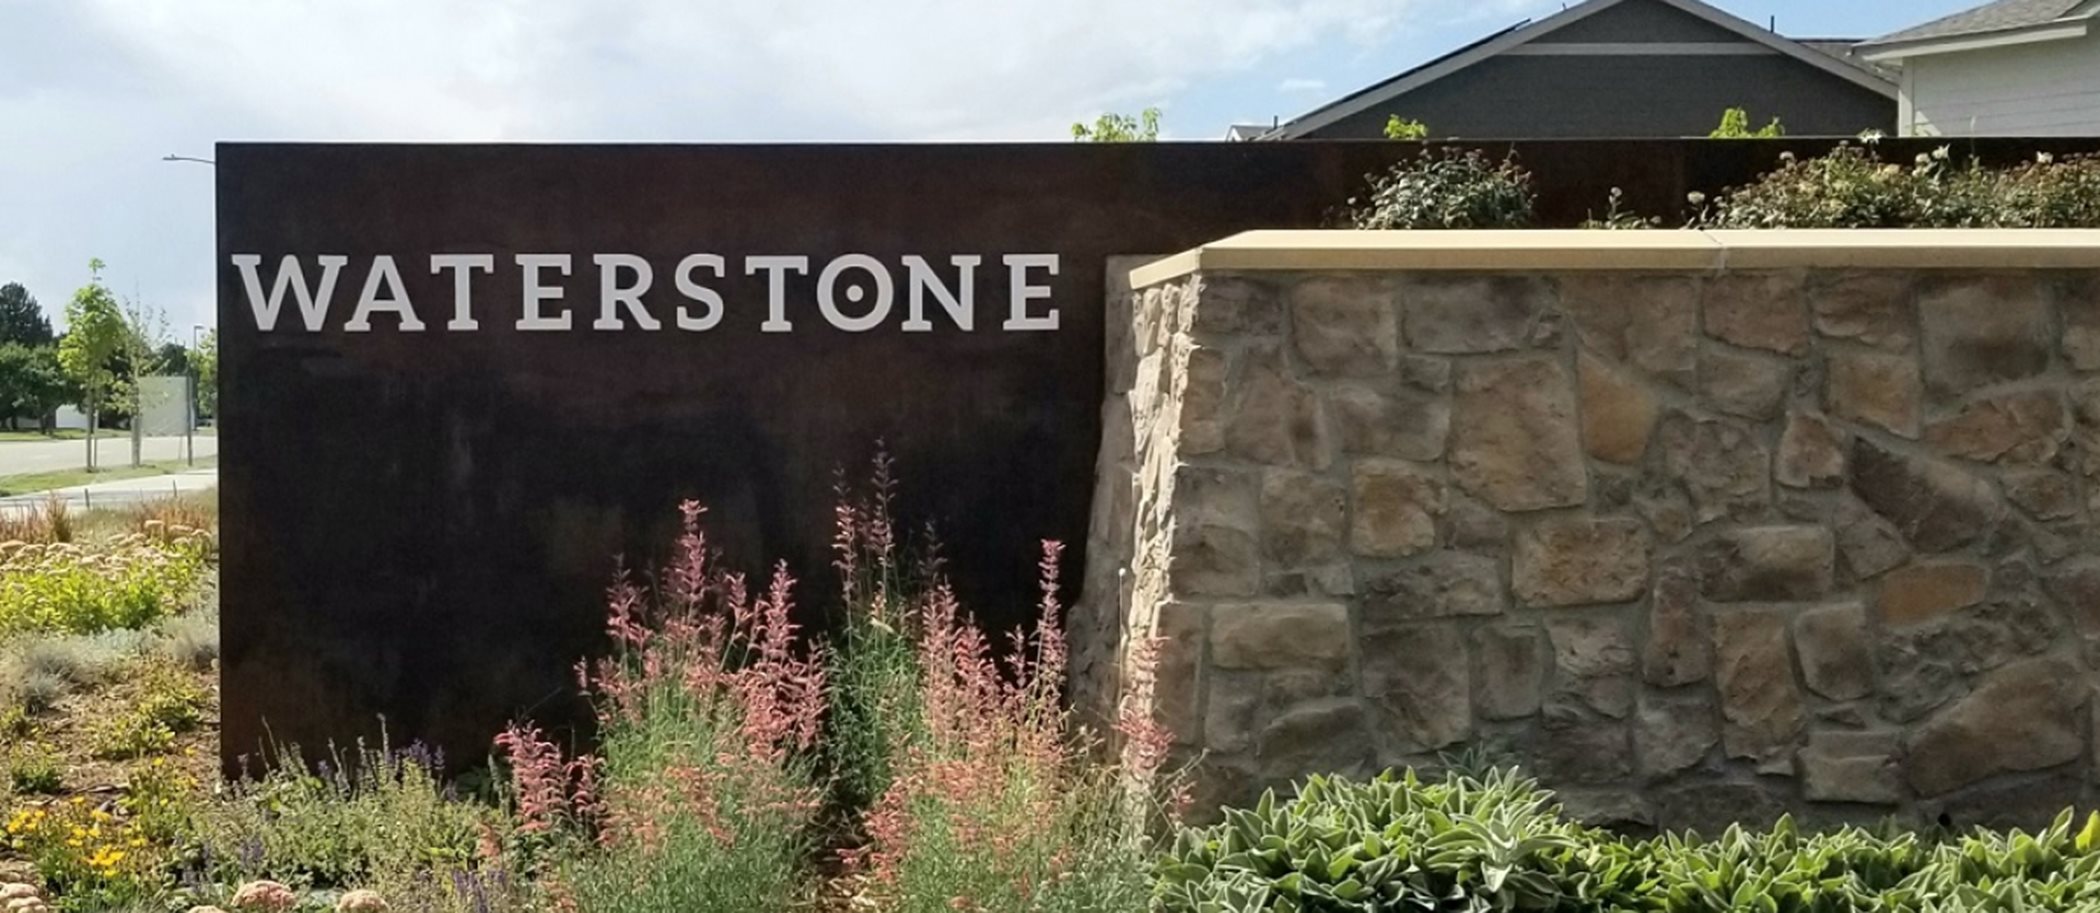 Waterstone welcome sign